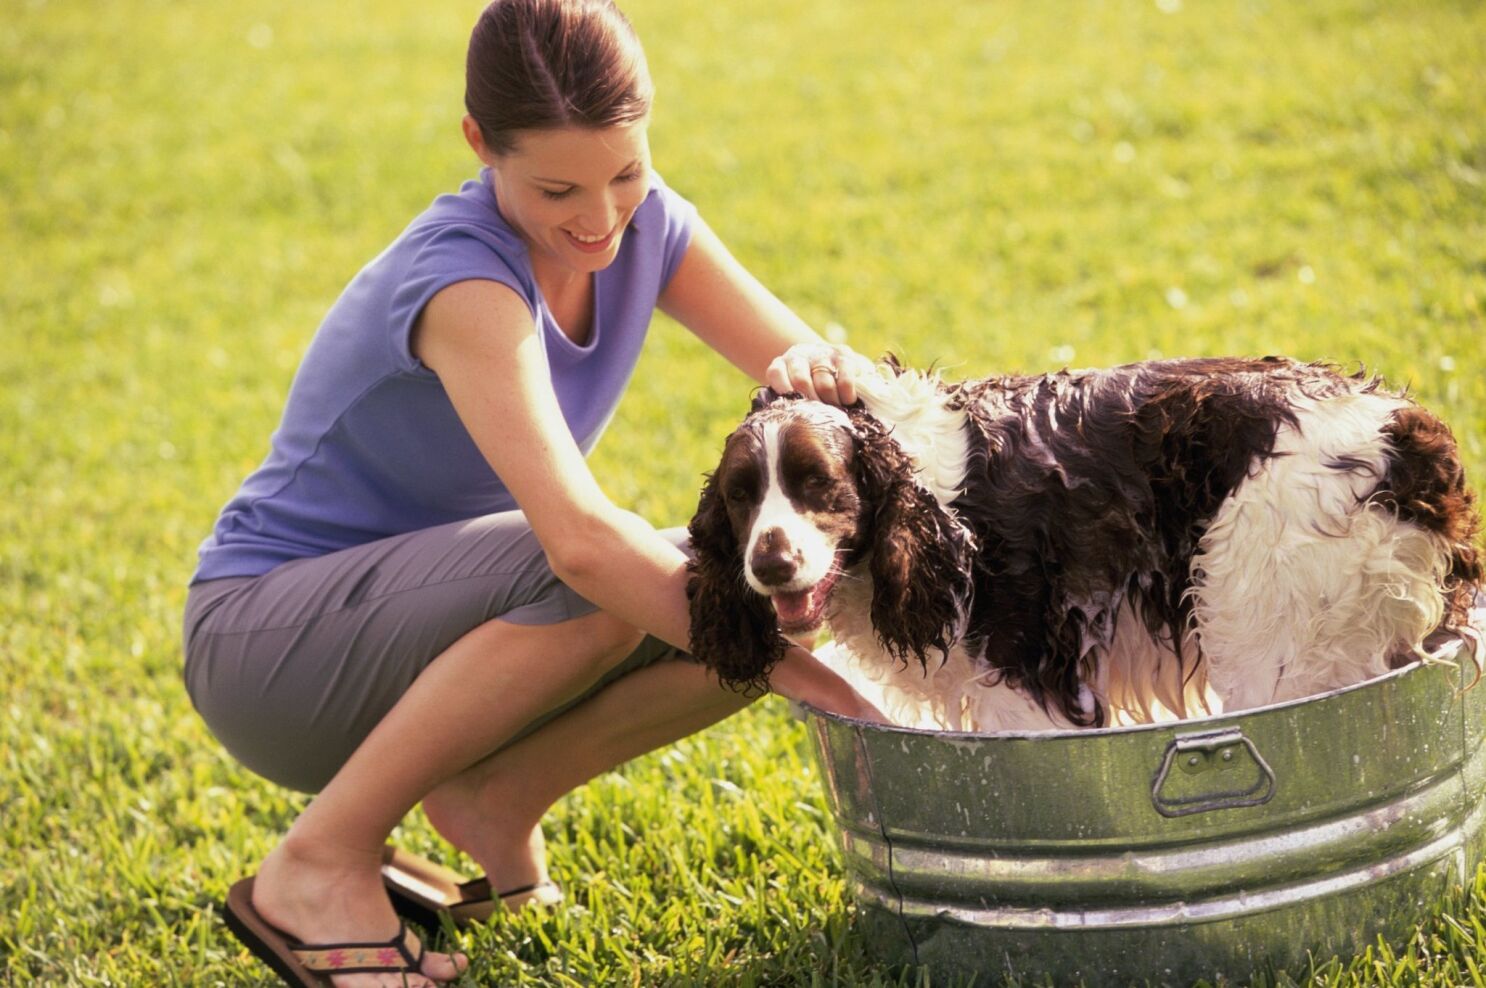 Be WaterSmart: Water-saving ideas for pet care - The San Diego Union-Tribune